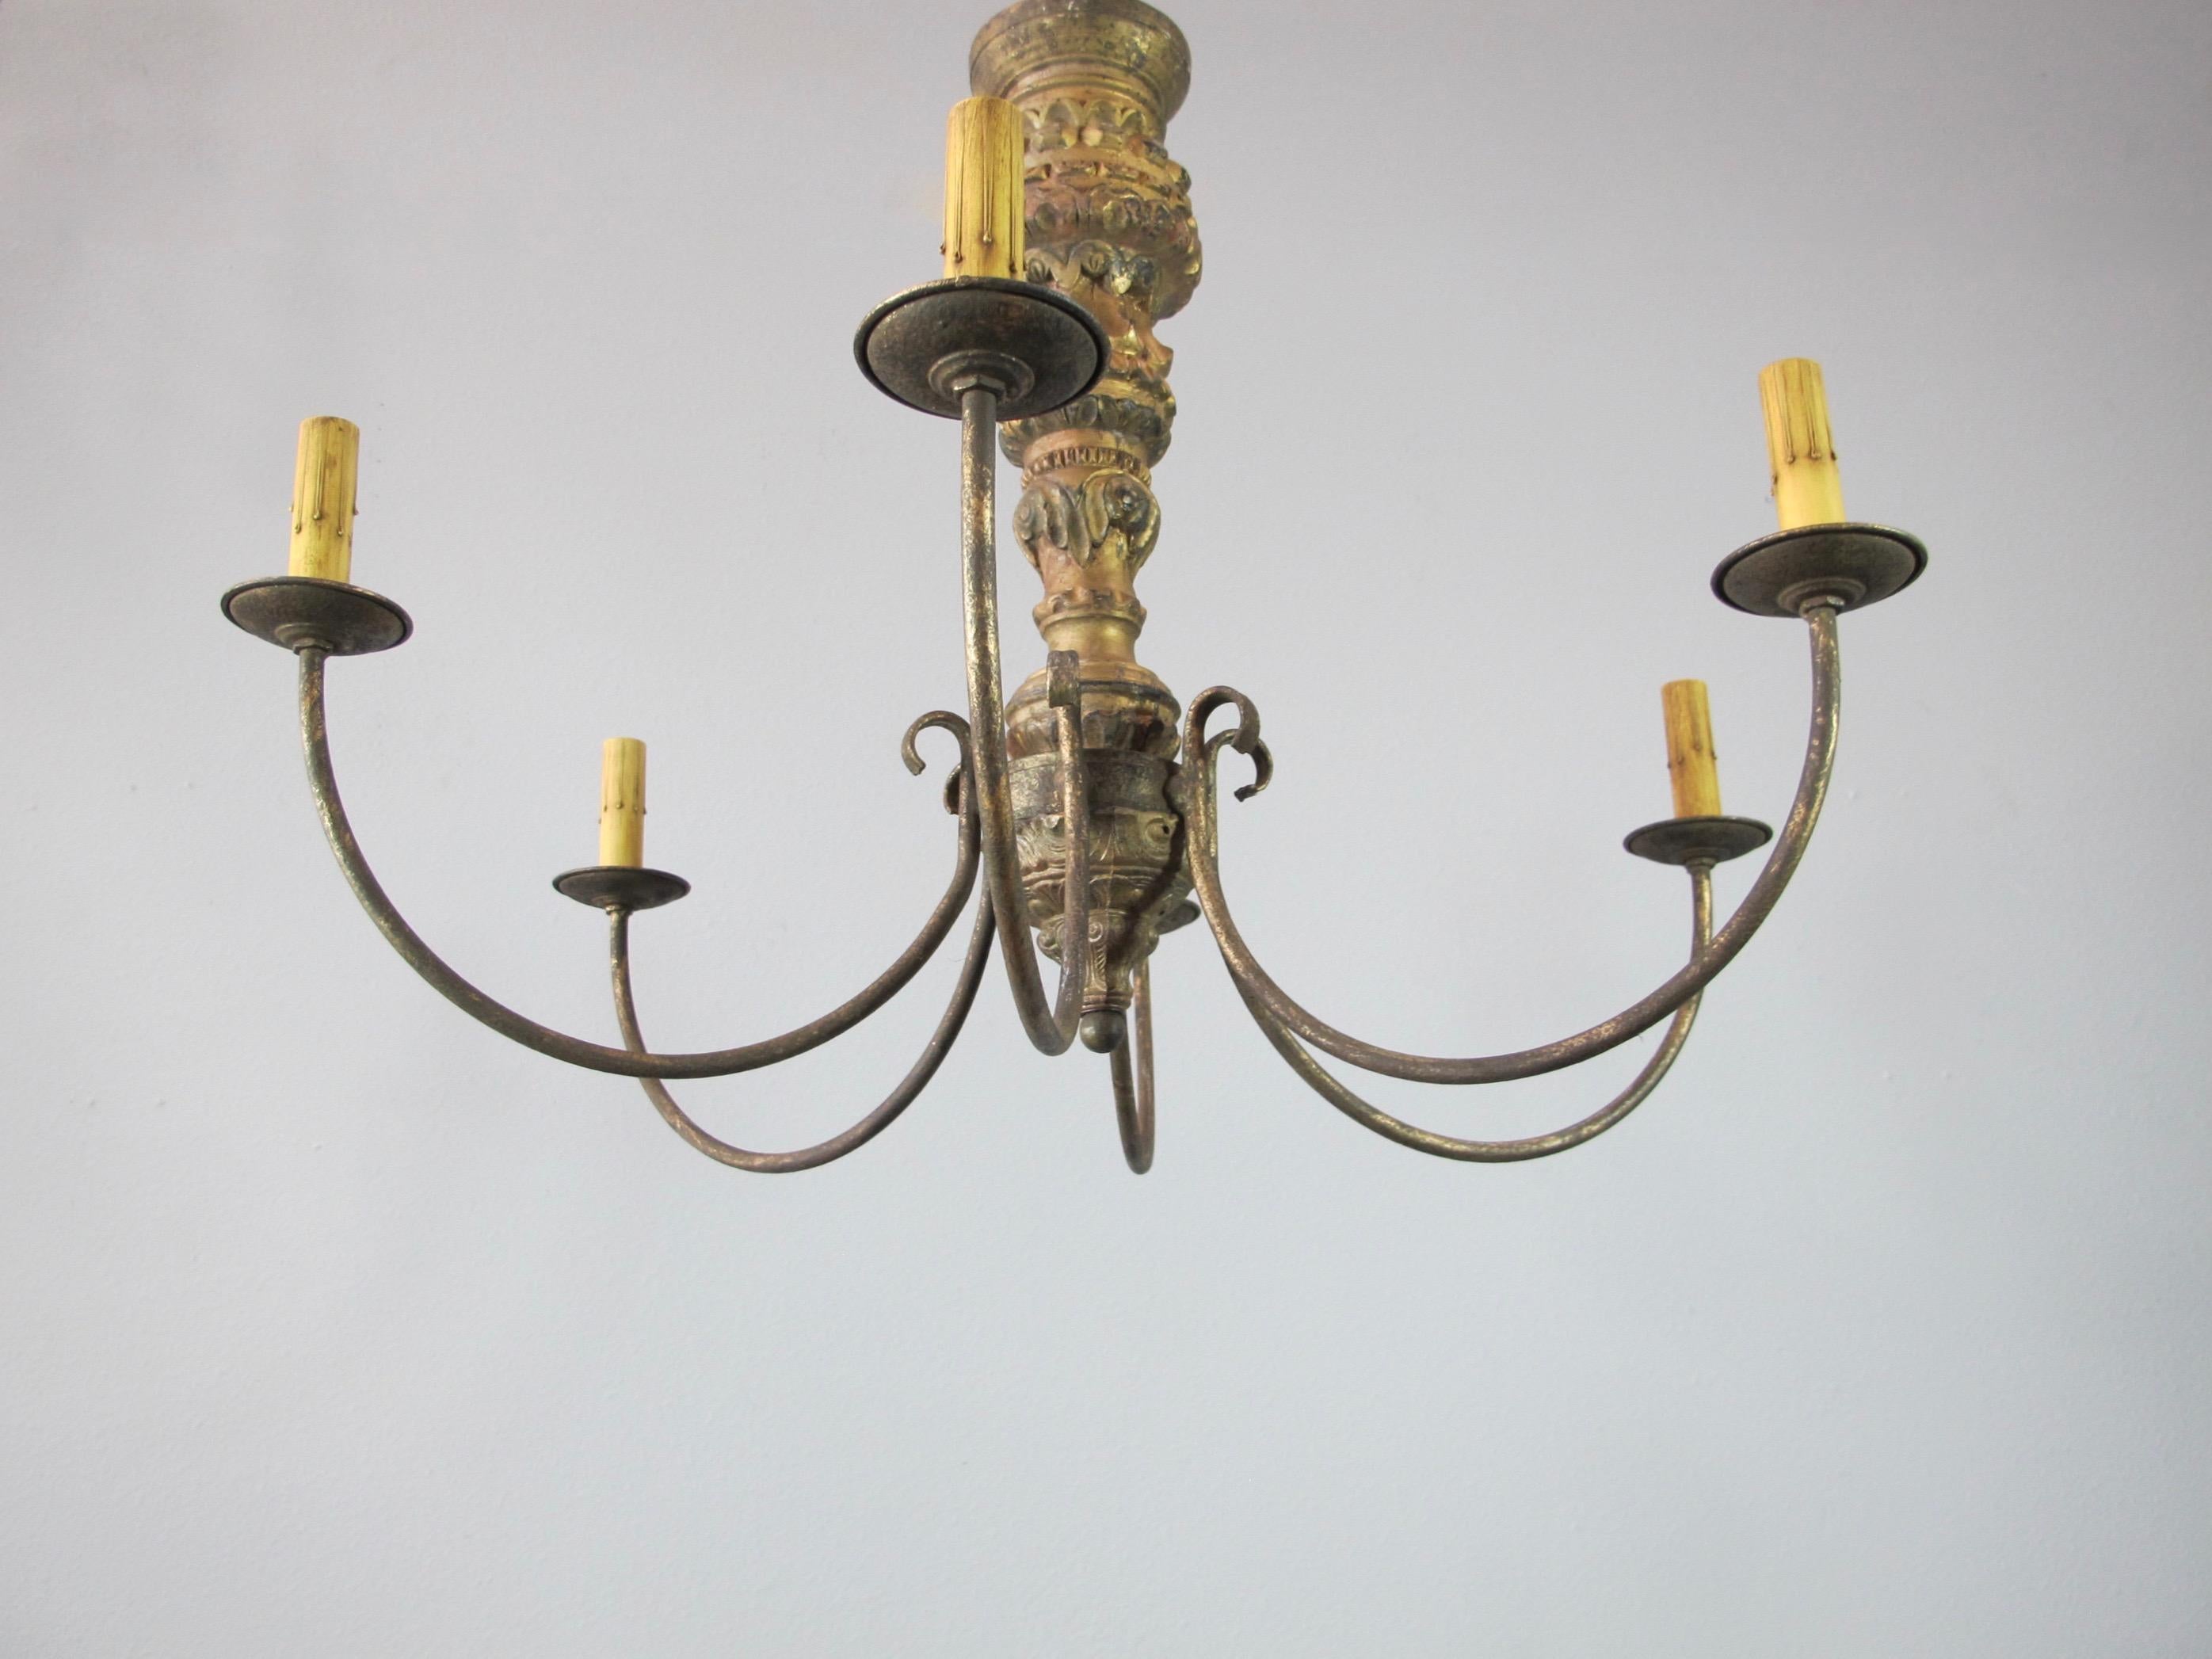 Matched pair of chandeliers created with highly carved gold gilt Italian candlesticks. The antique candlesticks are all original and were used as the base of the chandelier. The arms and bottom are new. Each chandelier has six candelabra base bulbs